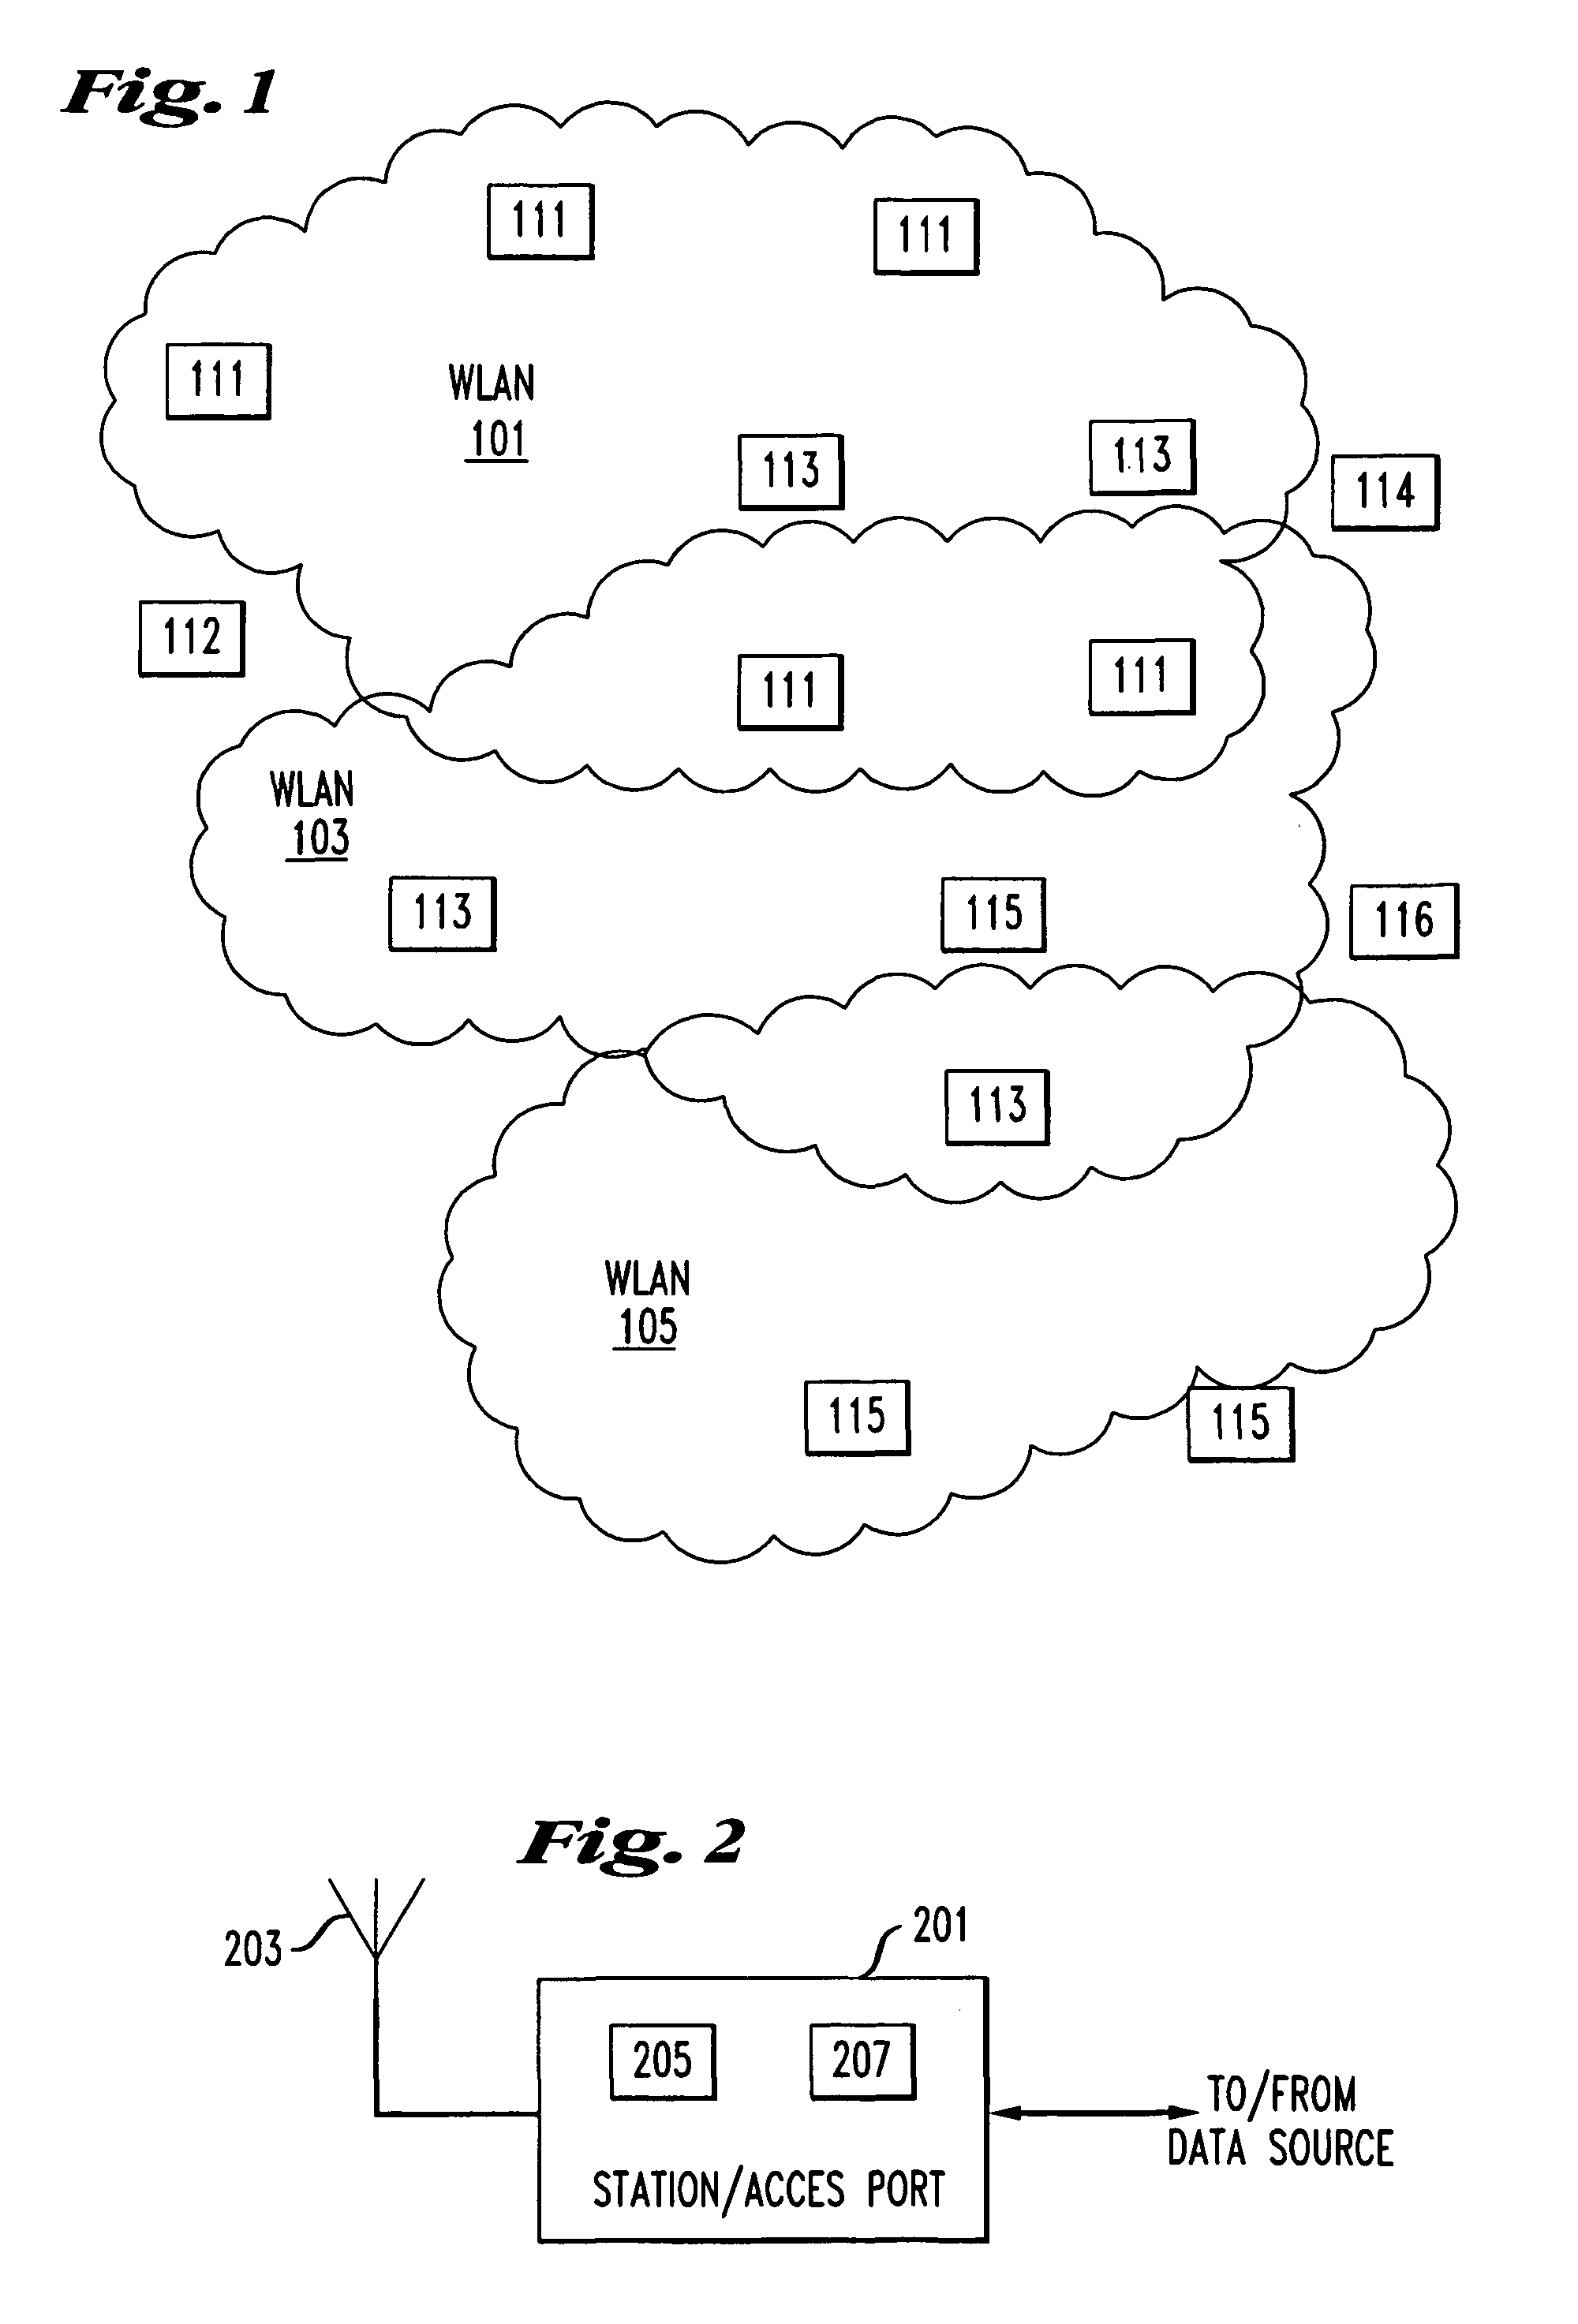 Method for enabling interoperability between data transmission systems conforming to IEEE 802.11 and HIPERLAN standards